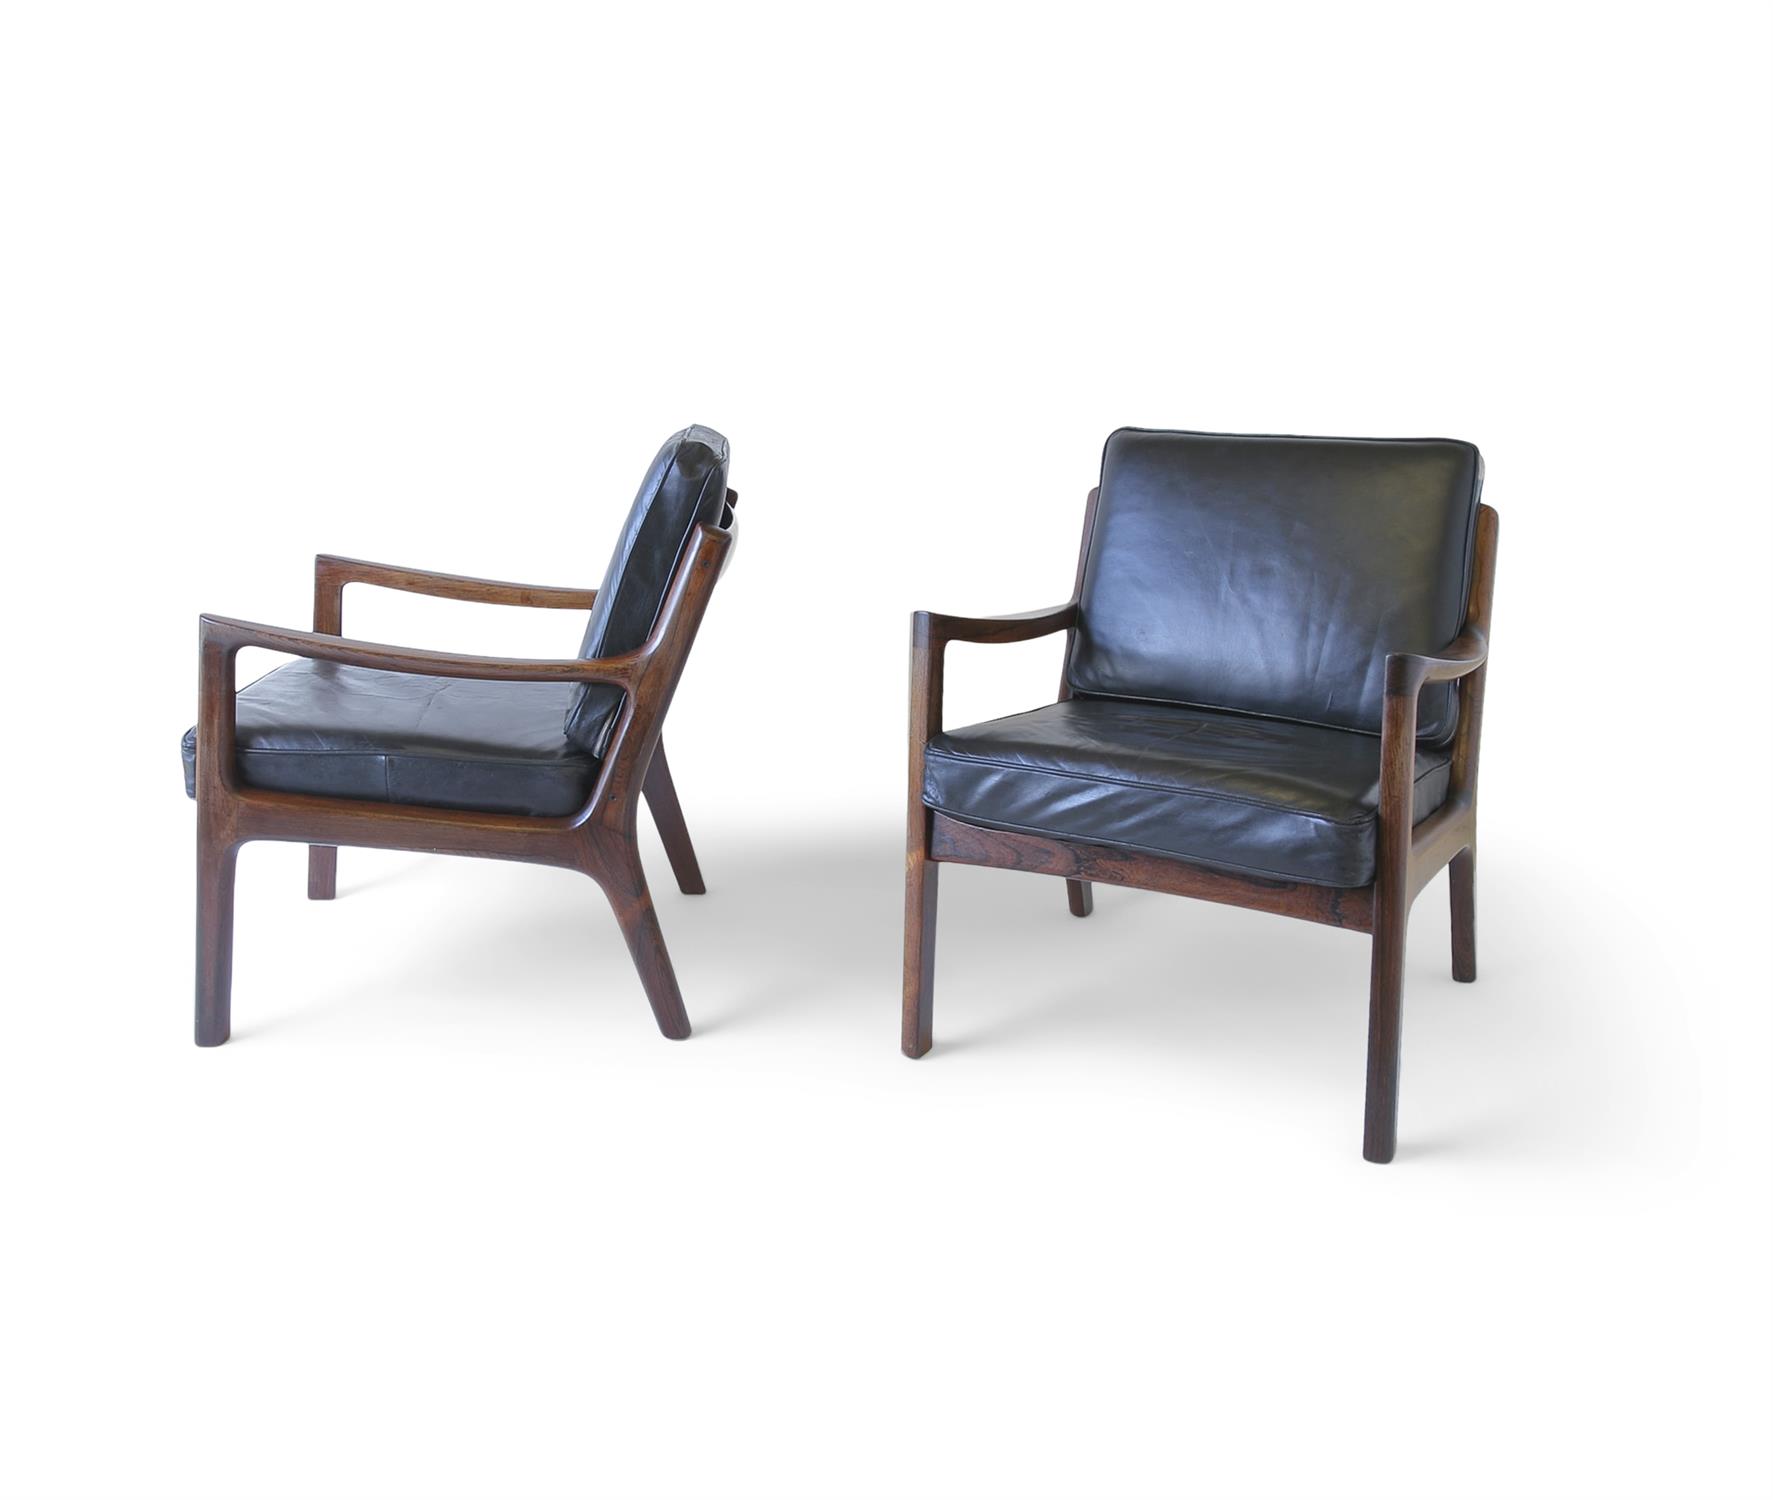 OLE WANSCHER A pair of Senator lounge chairs by Ole Wanscher, produced by France & Sons. Denmark, - Image 3 of 6